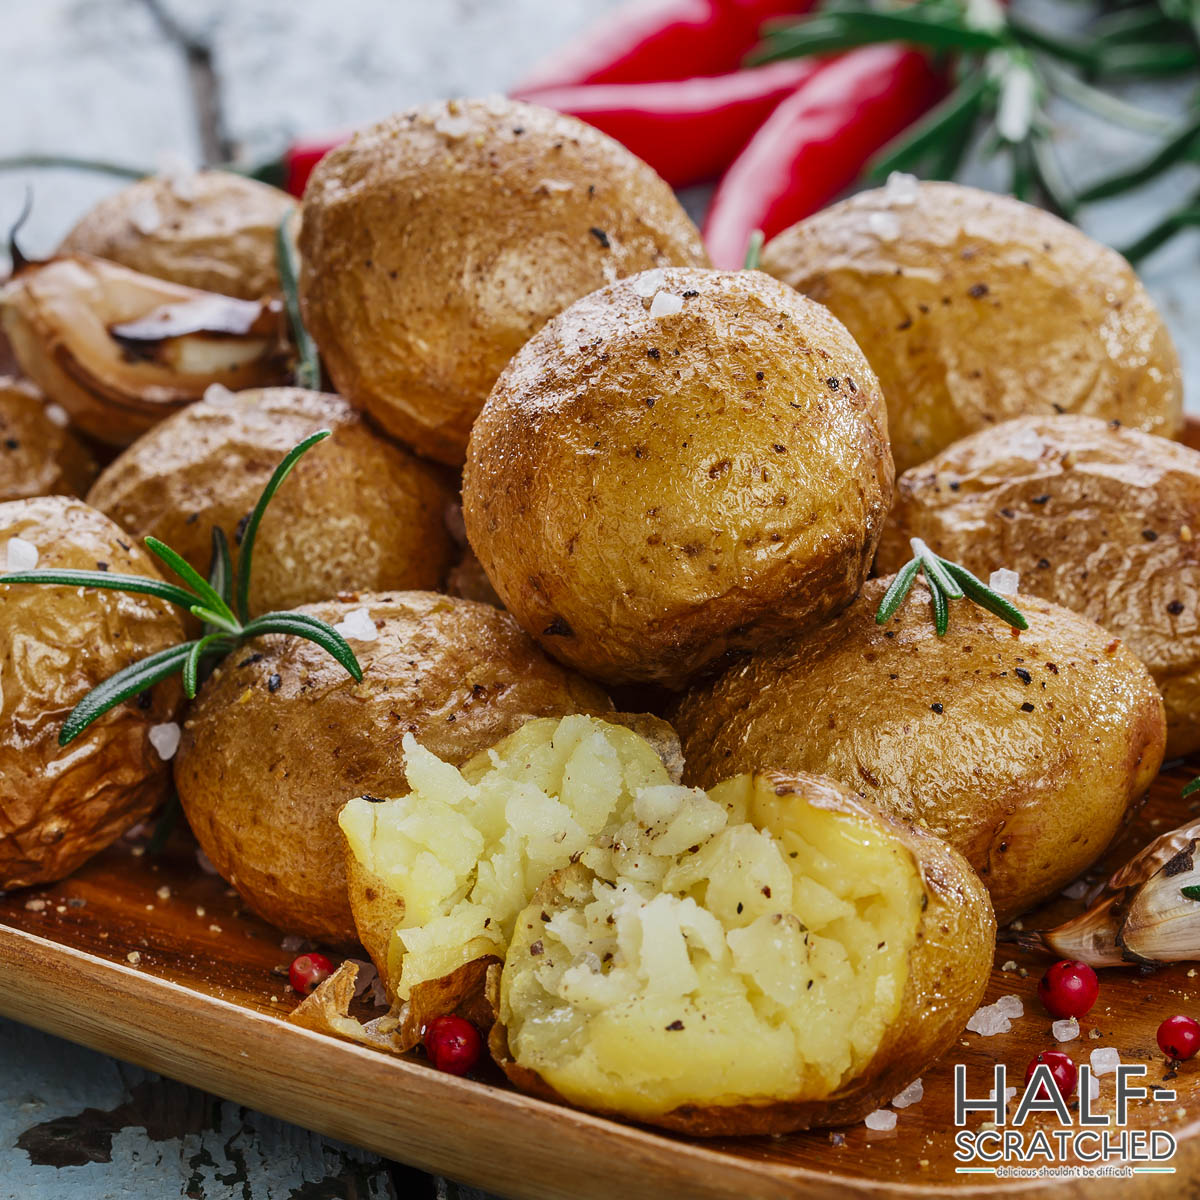 Baked potatoes in the oven at 375 F